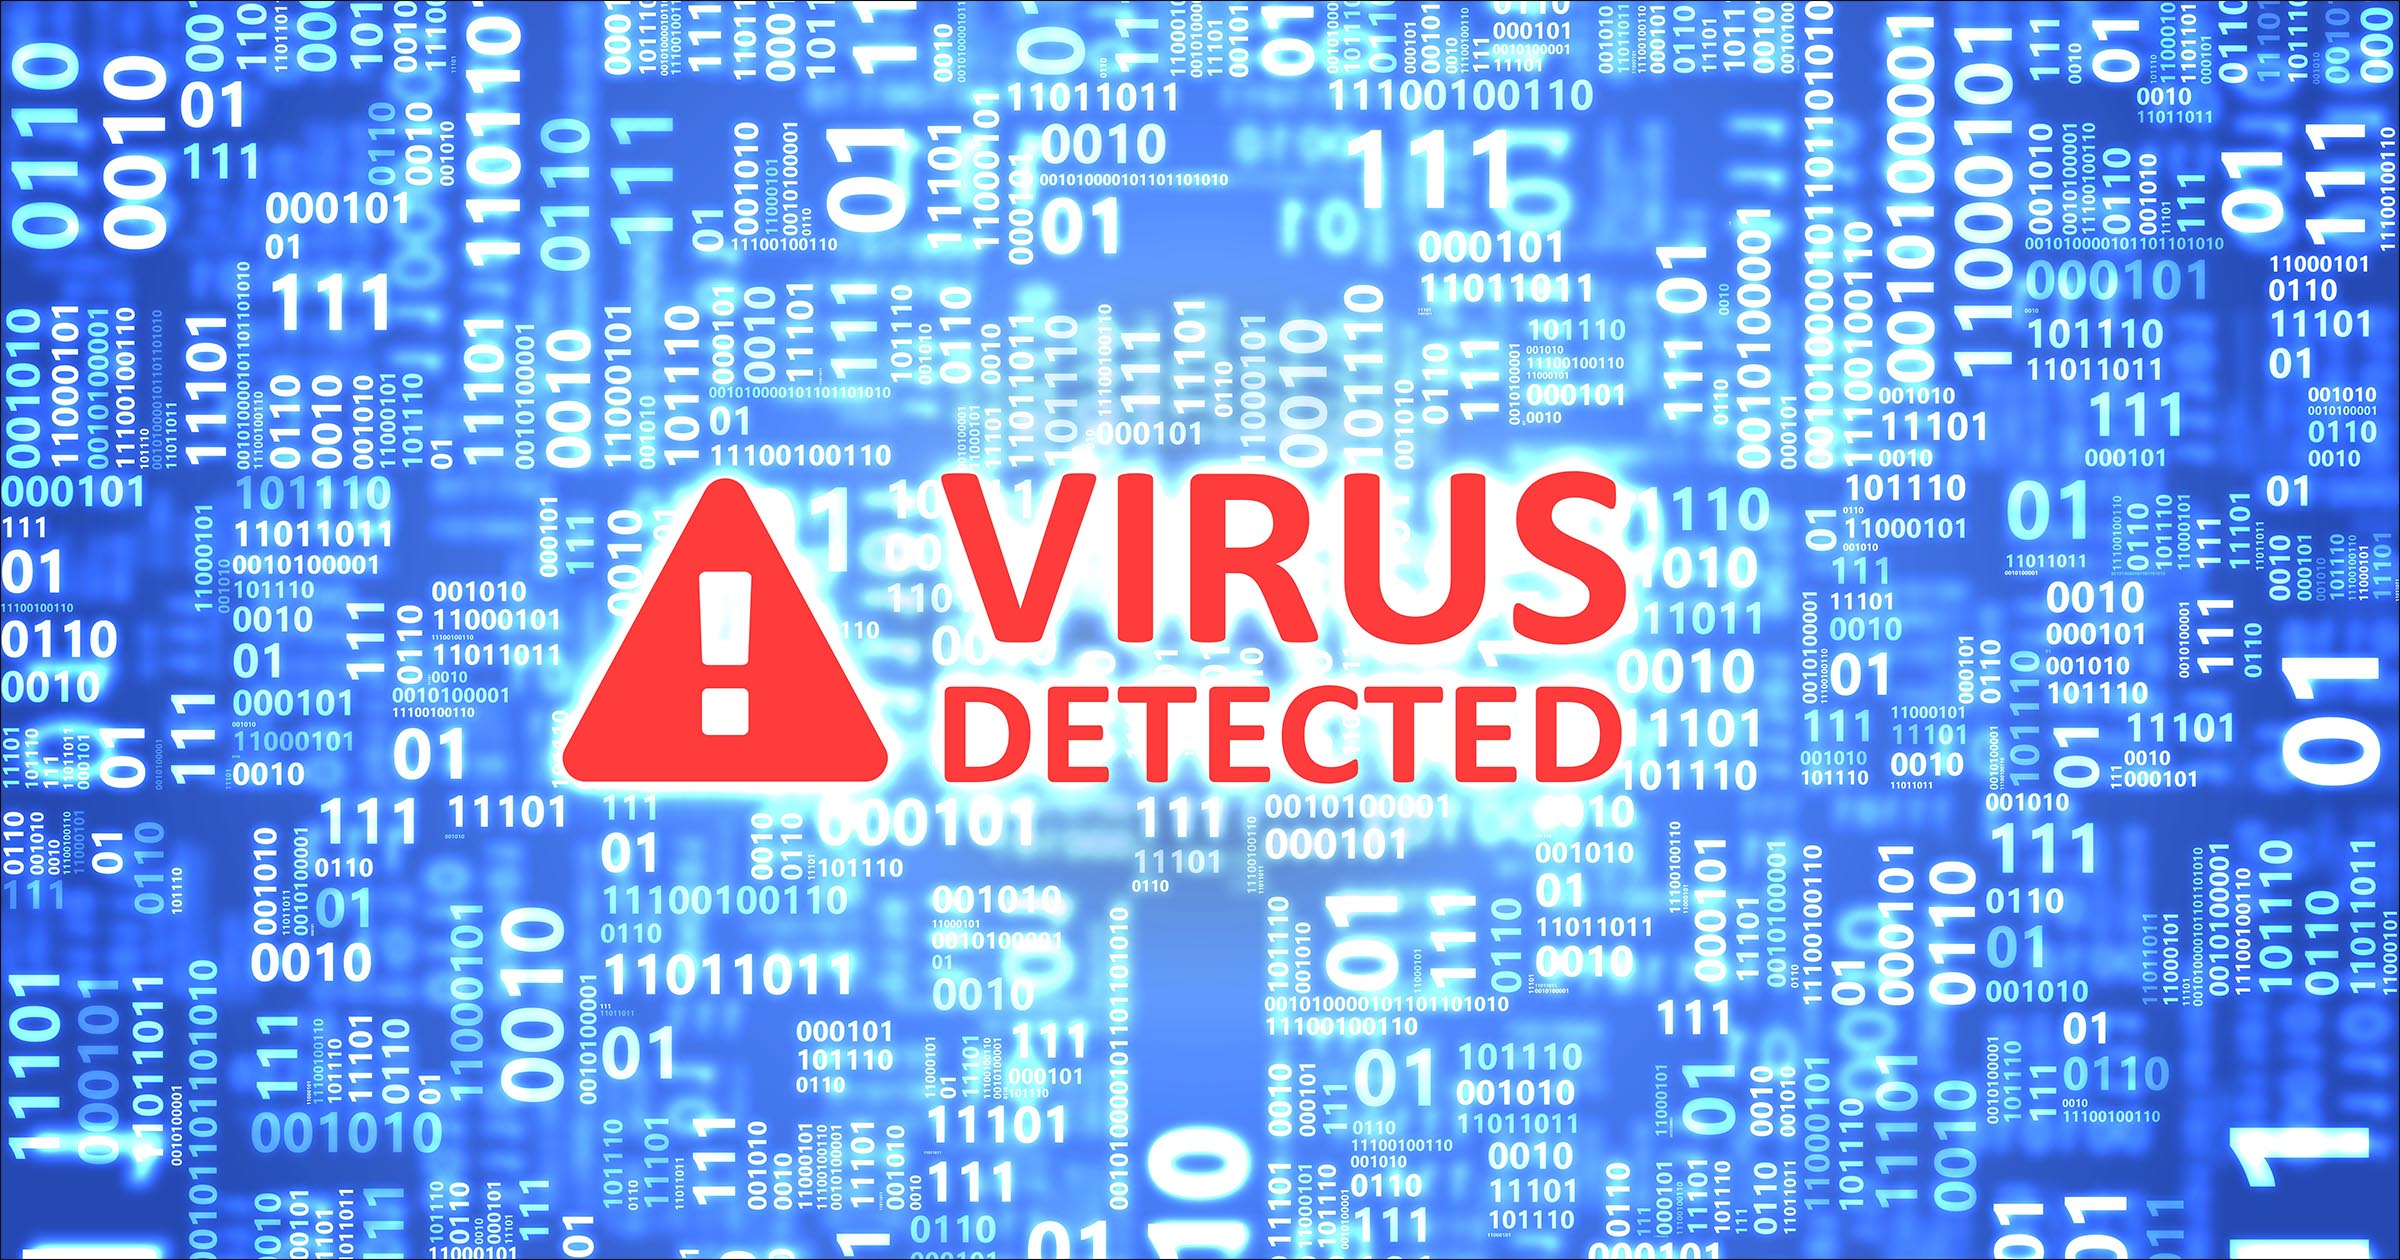 Install a reliable antivirus or anti-malware software if you don't have one already
Perform a full system scan to detect and remove any malicious files, including bpx.exe